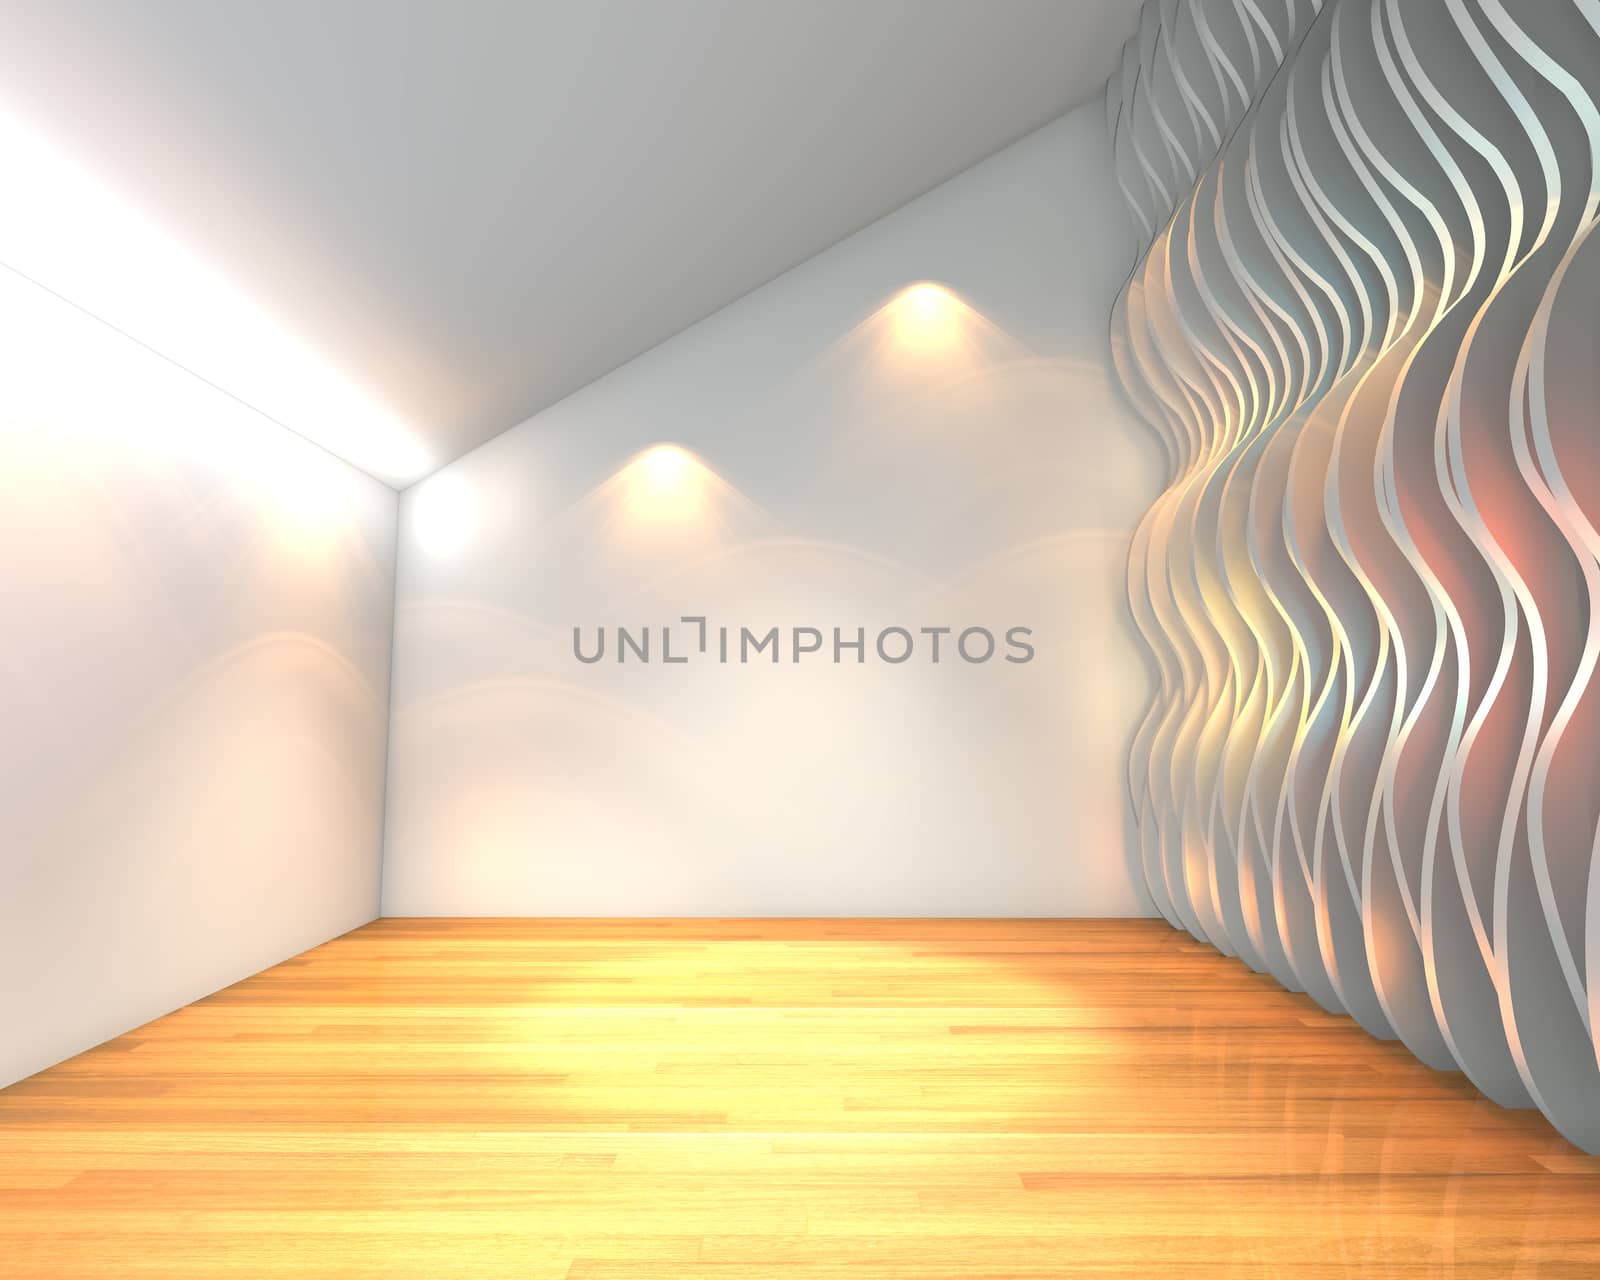 Abstract white empty room with wave wall and decorated with wooden floors.